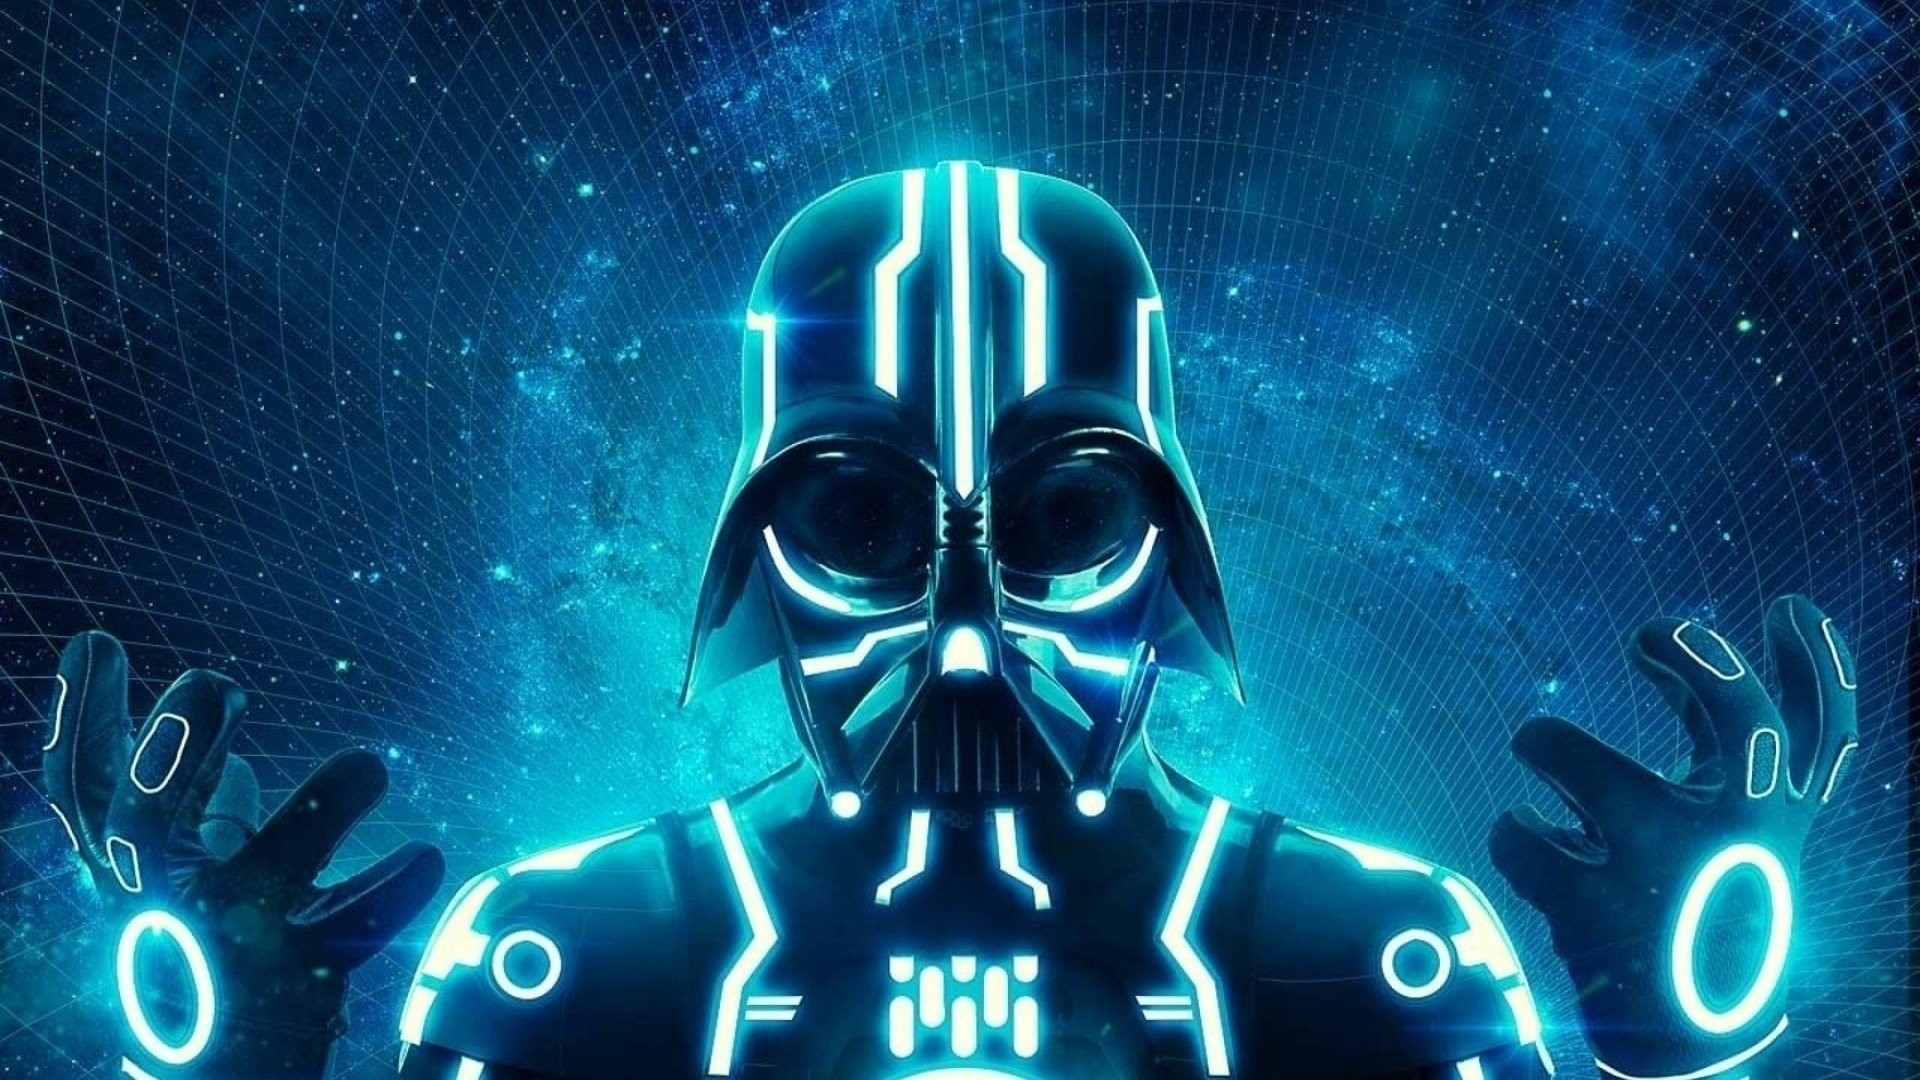 1920x1080 Tron Vader